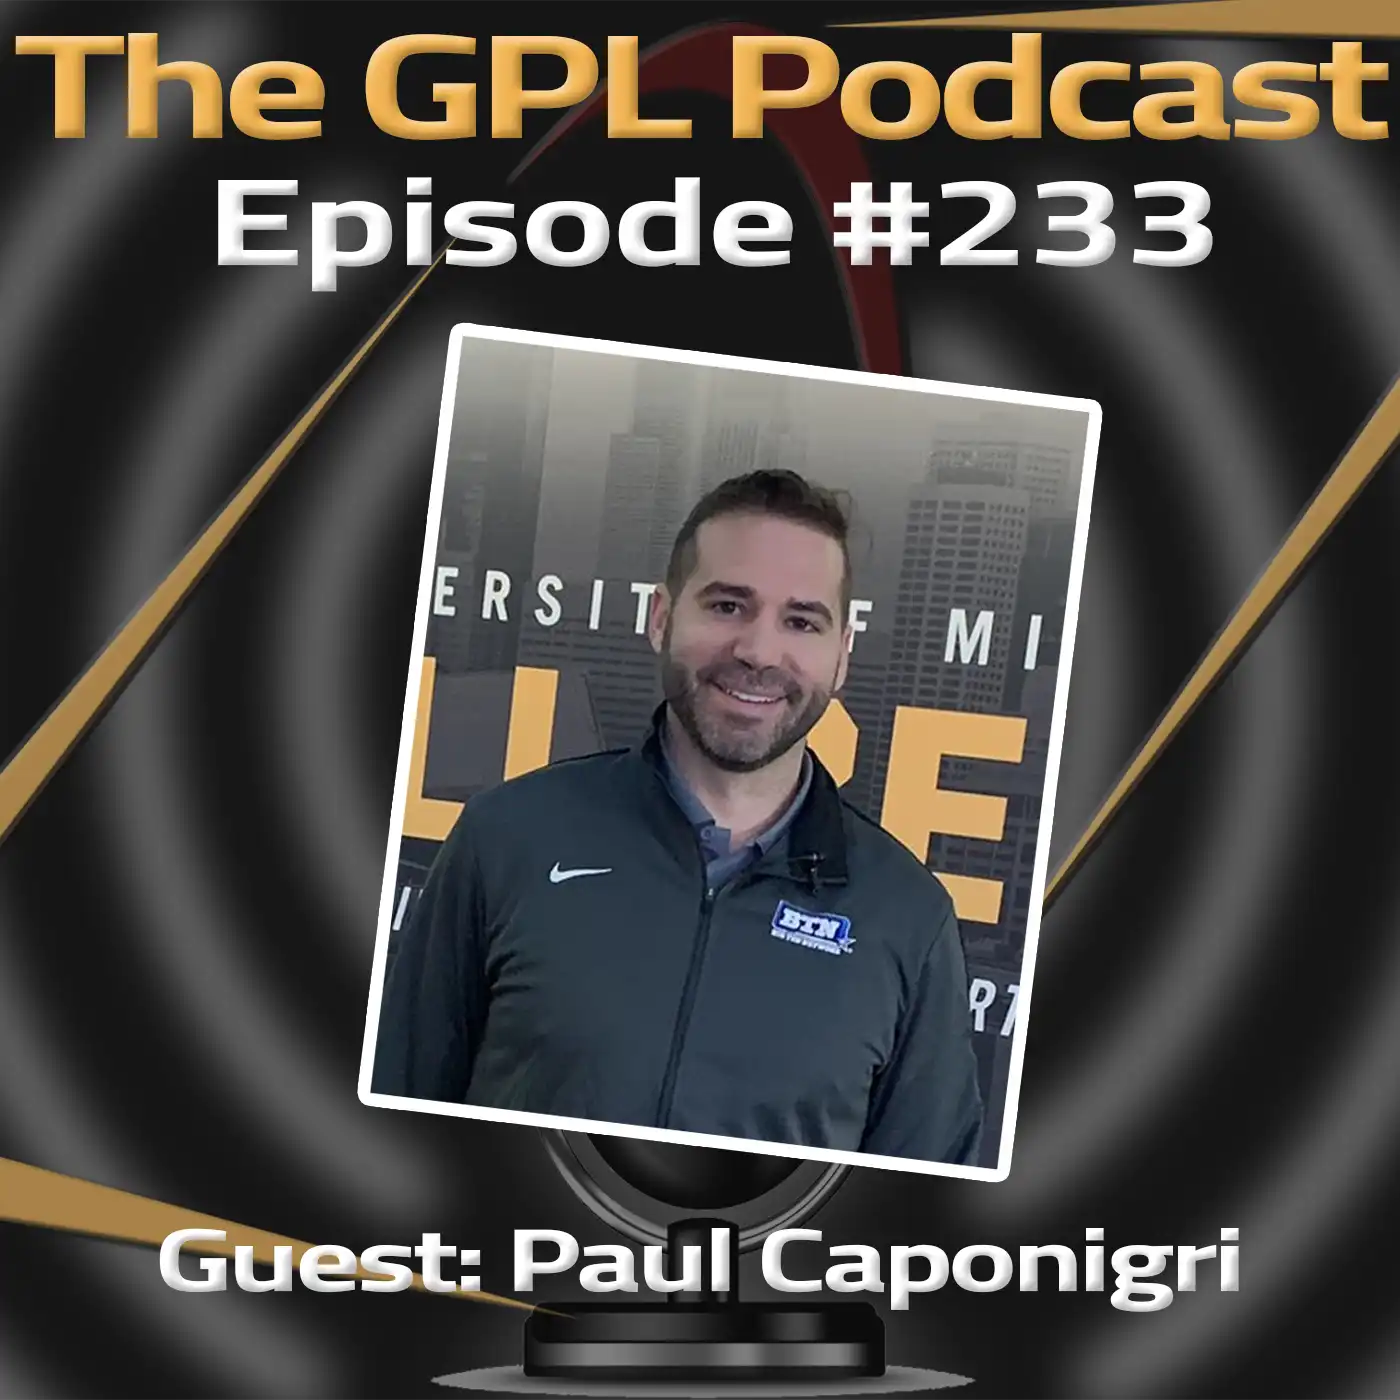 GPL Podcast #233: BTN’s Paul Caponigri joins the show